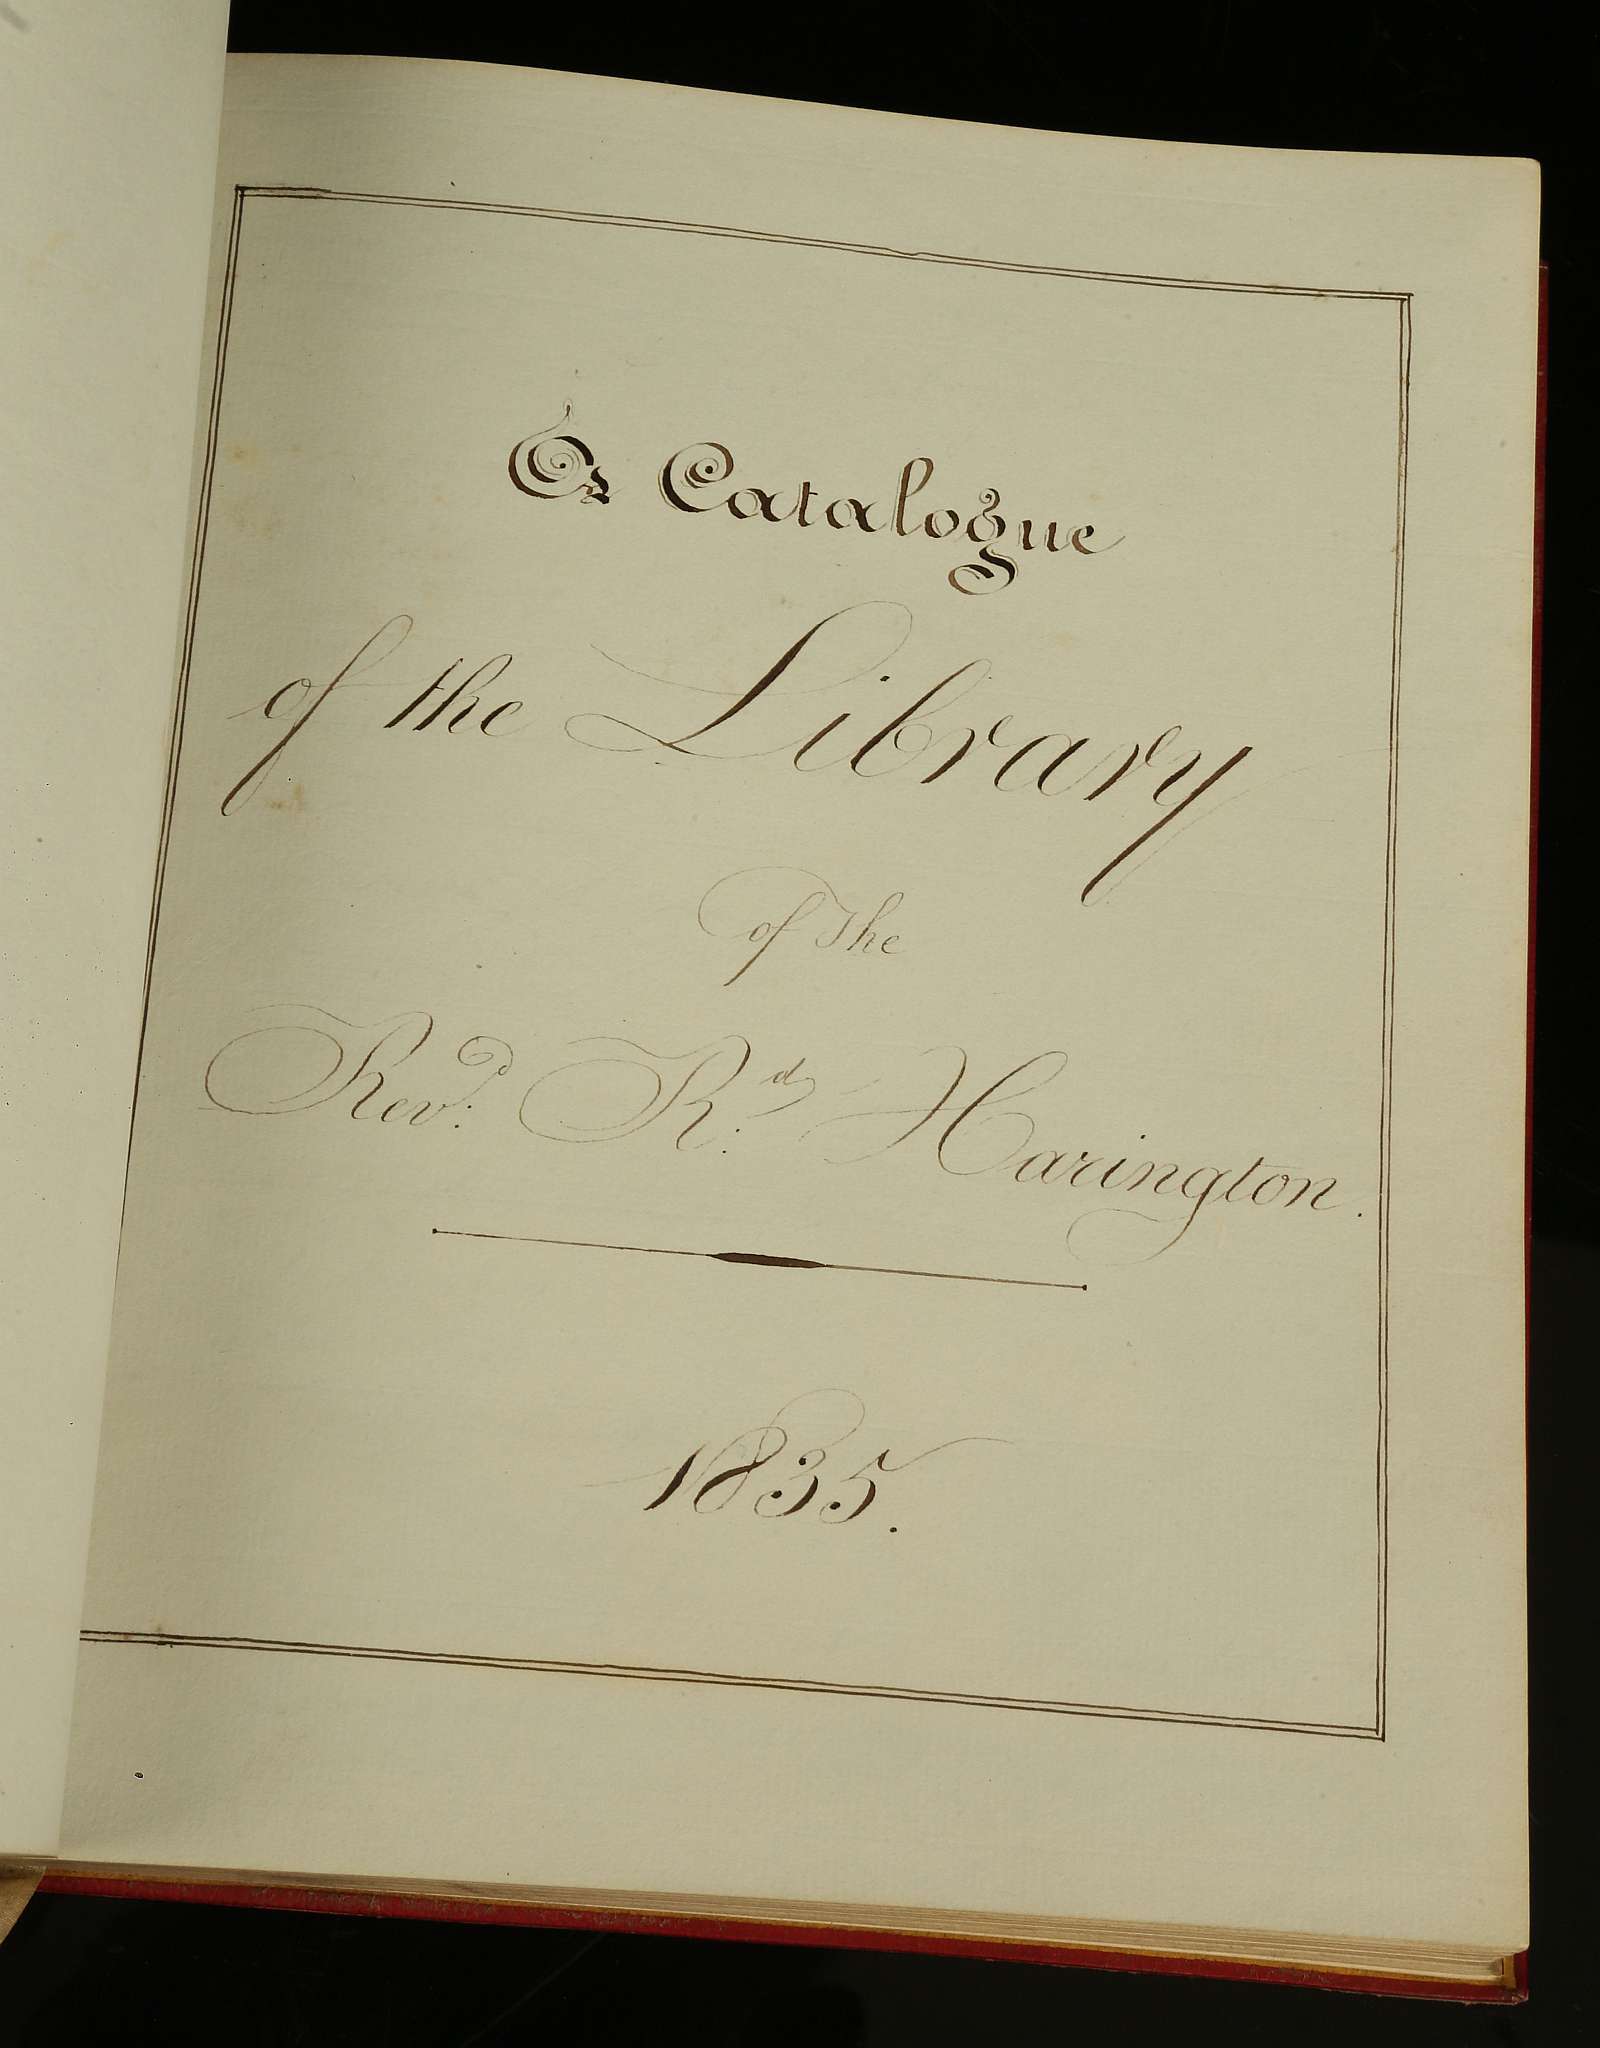 MS. A Catalogue of the Library of the Revd: R:d Harrington. 1835. 4to. Containing an inventory of - Image 3 of 5